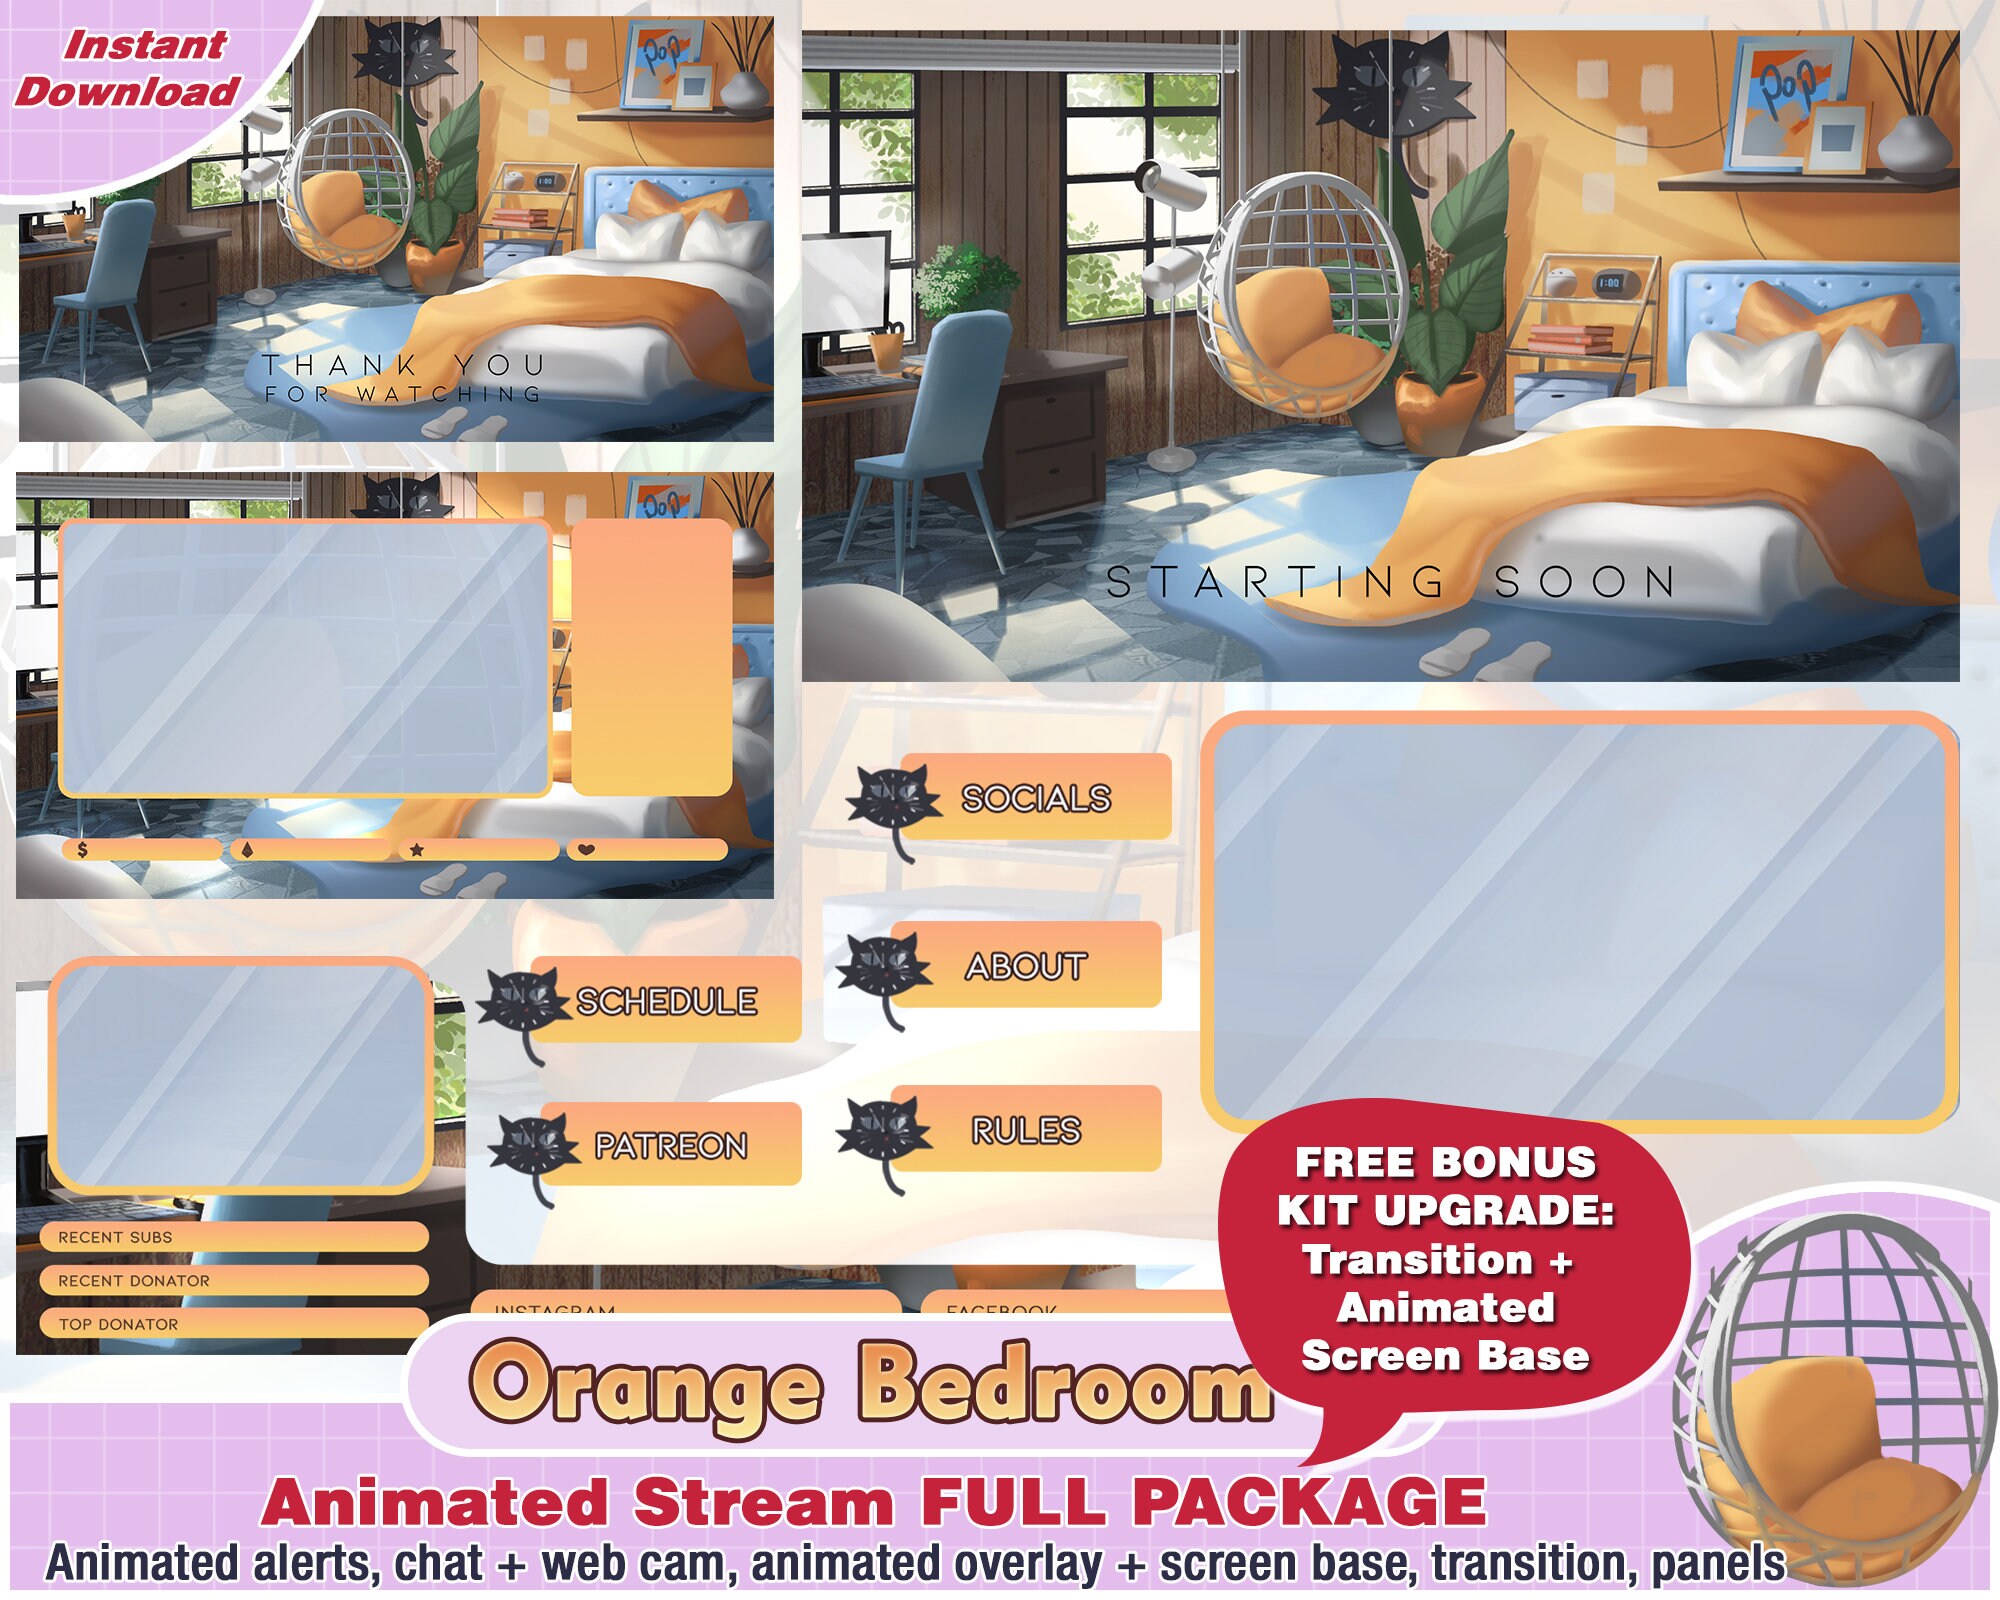 Interactive NPC Live Streamer Poster for Sale by Tigerstreet